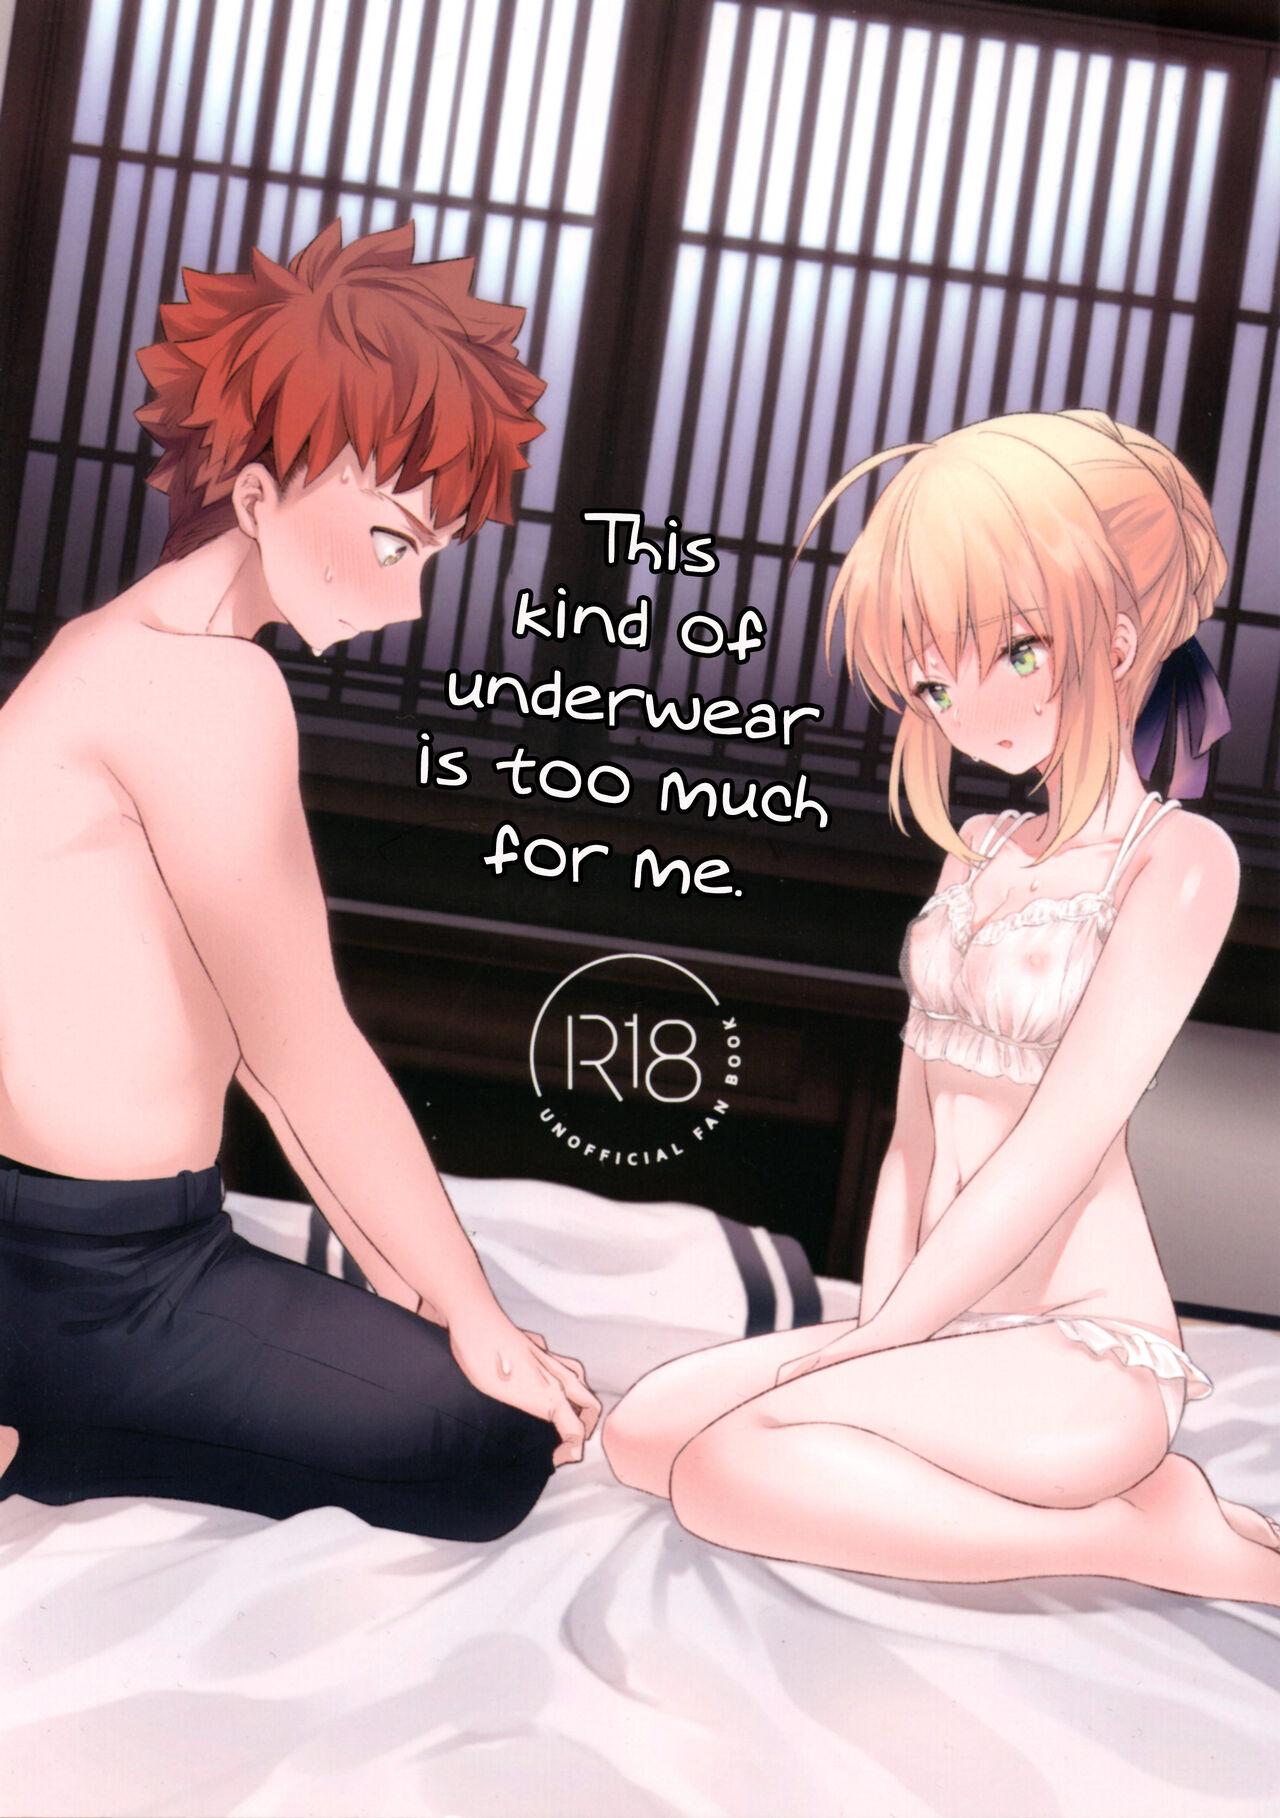 Emo Souiu Shitagi wa Ore ni wa Hayai | This kind of underwear is too much for me. - Fate stay night Foot - Picture 1